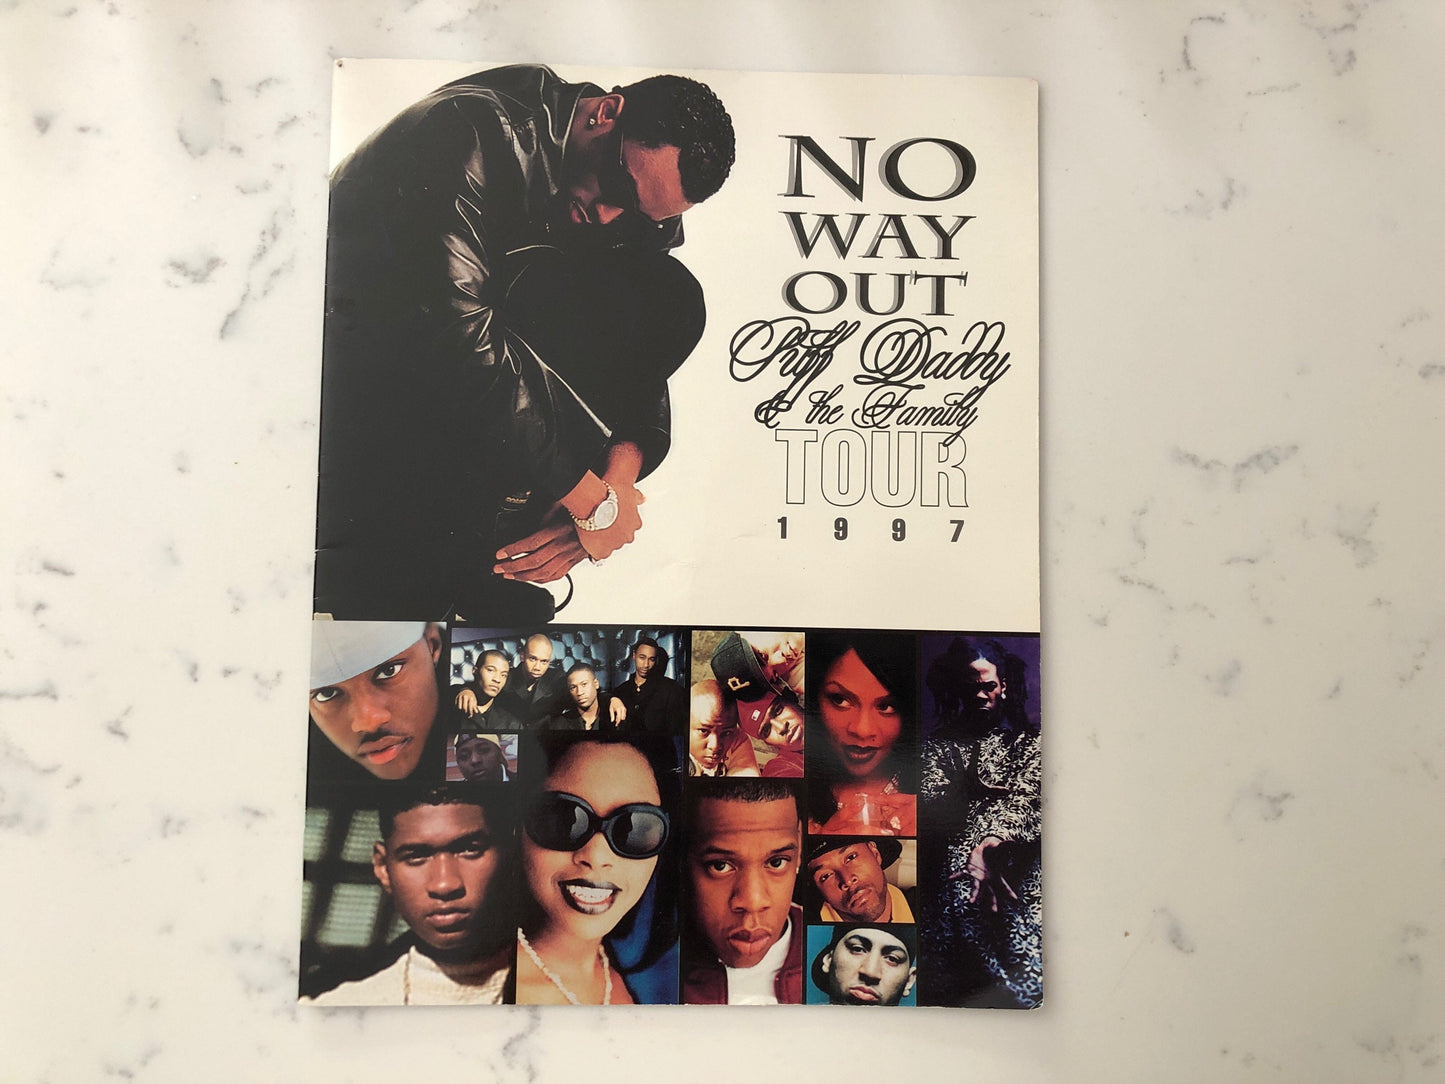 No Way Out Concert Tour | Puff Daddy and the Family | 1997 No Way Out Concert | Biggie Smalls | Puffy and Big Poppa | 1990's Rap Souvenirs